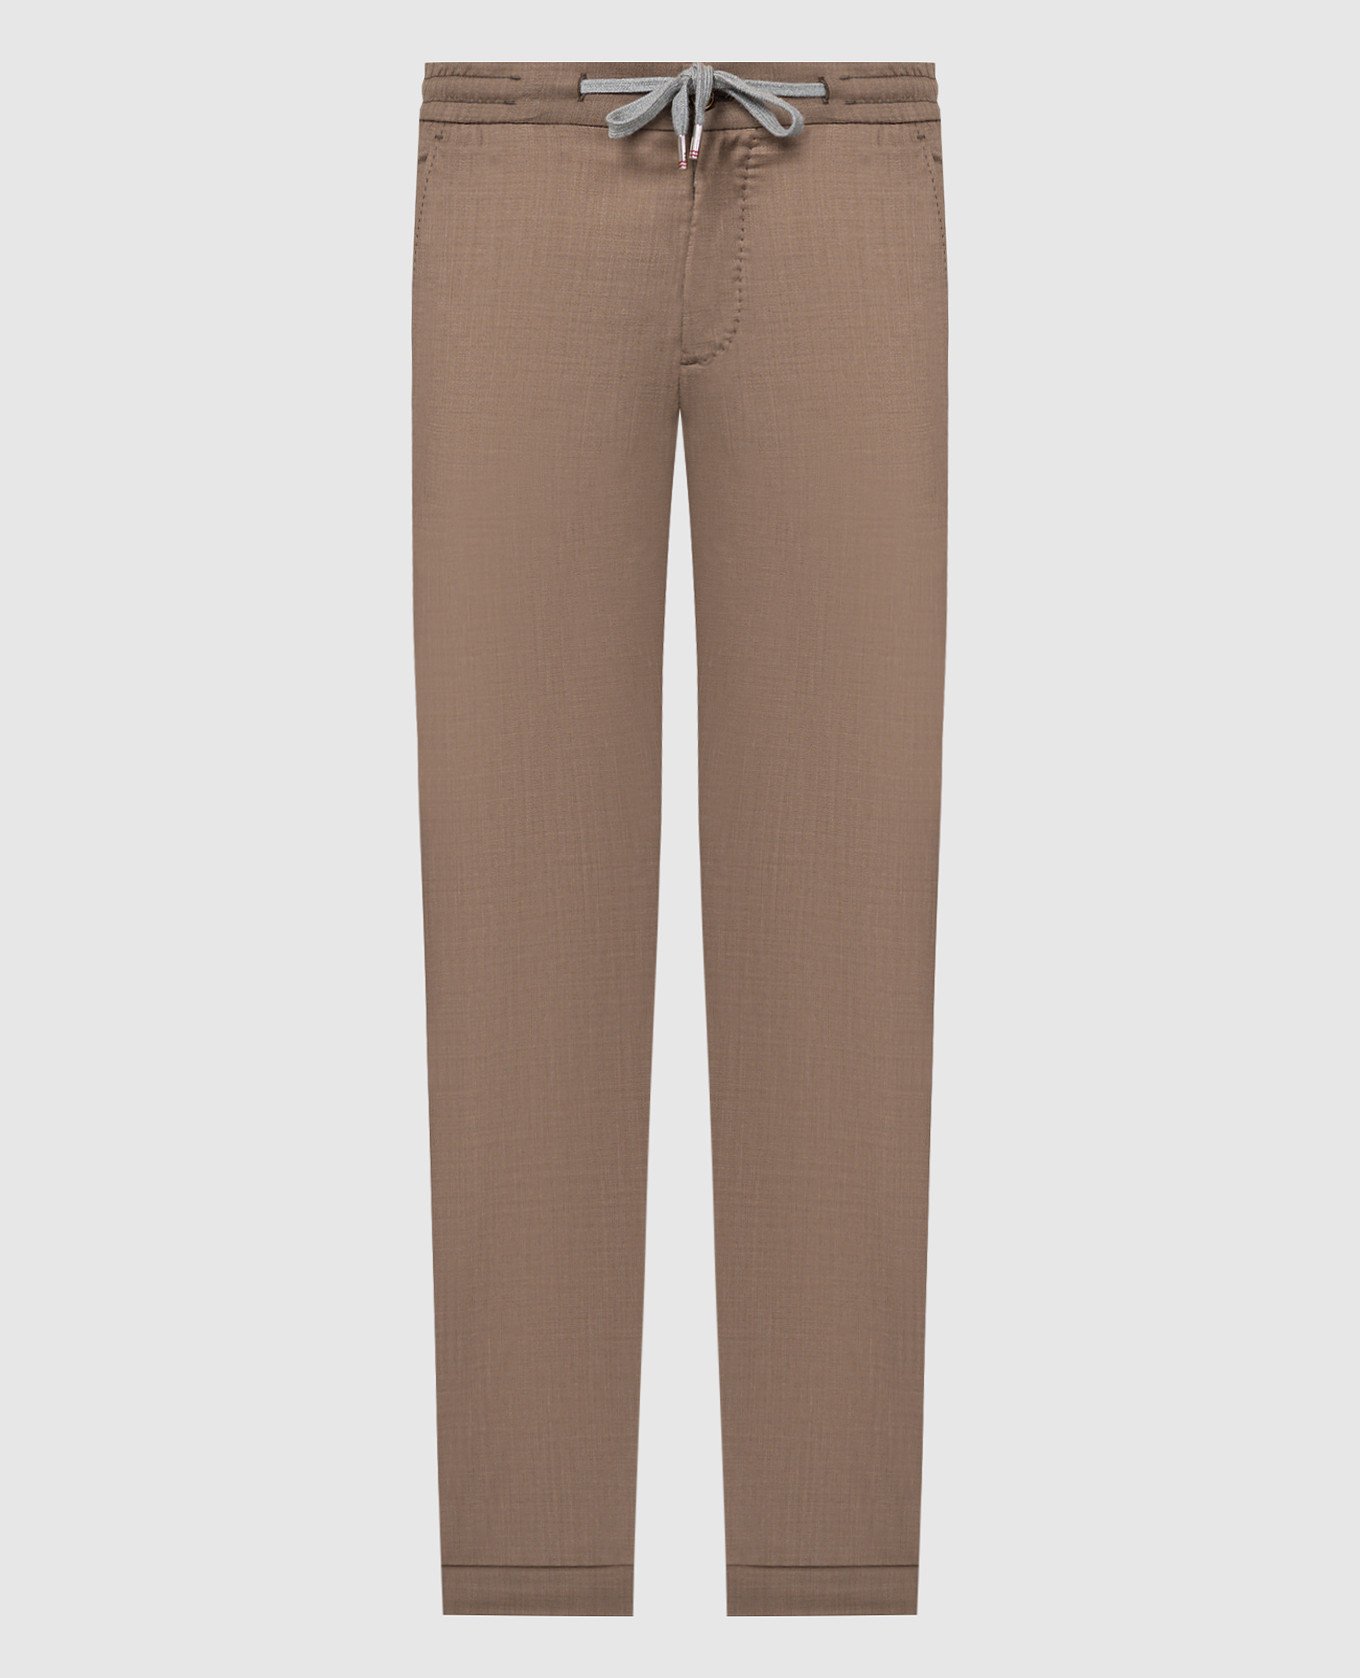 CARACCIOLO brown pants made of wool and silk